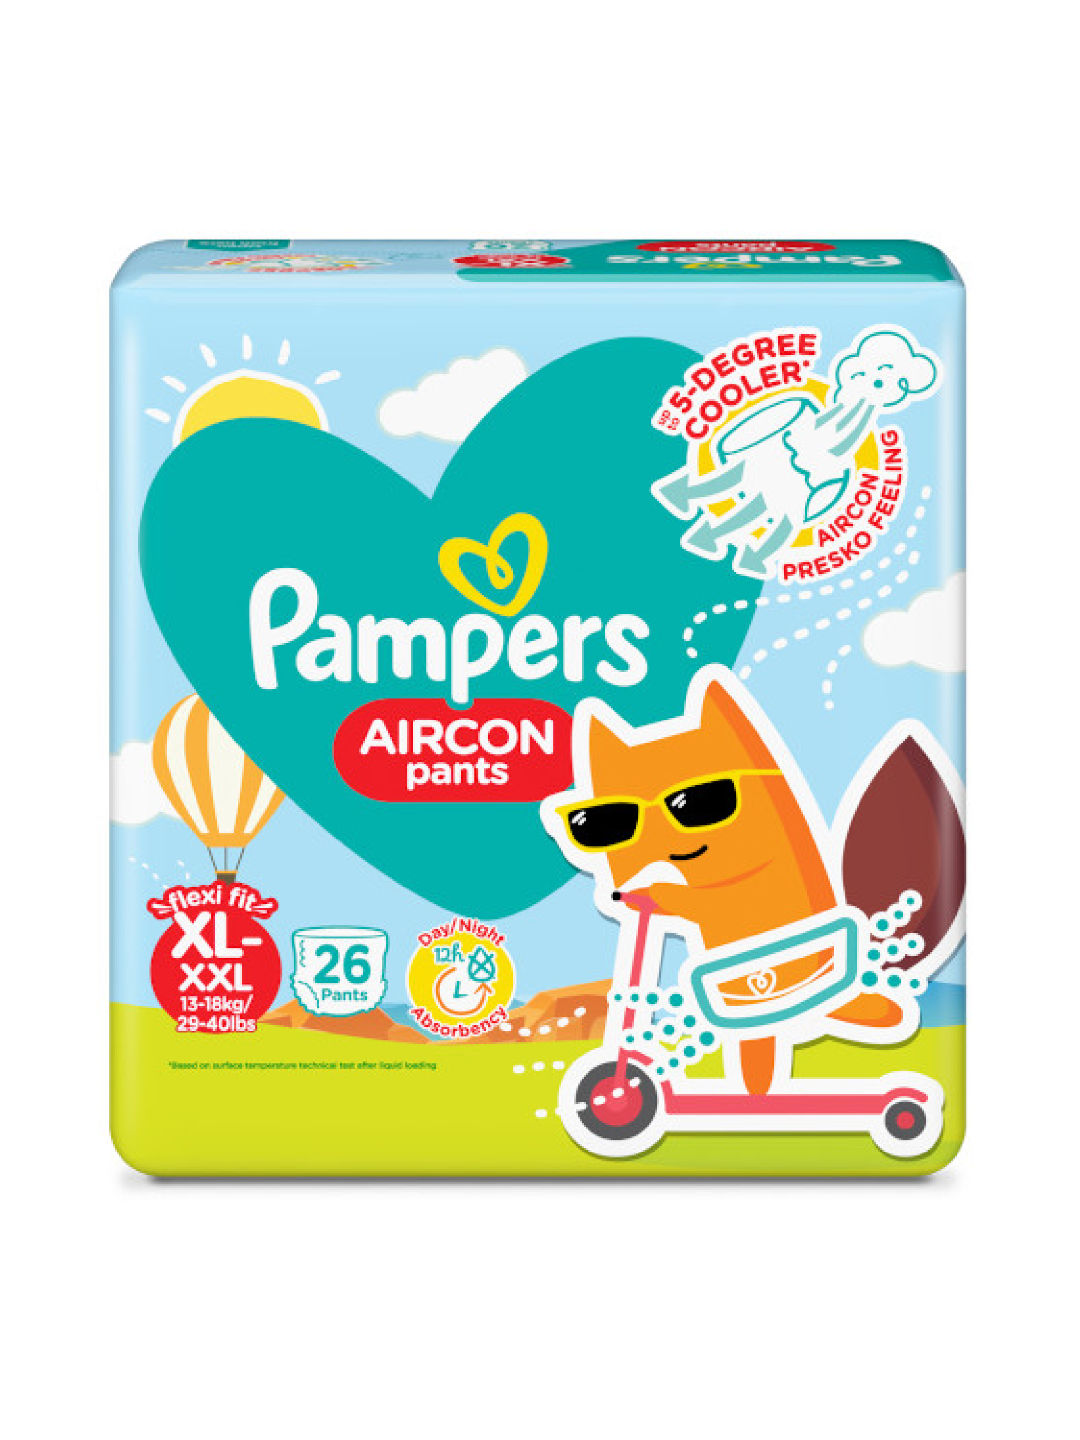 Pampers Aircon Pants Diapers XL 26s x 1 pack (26 pcs)